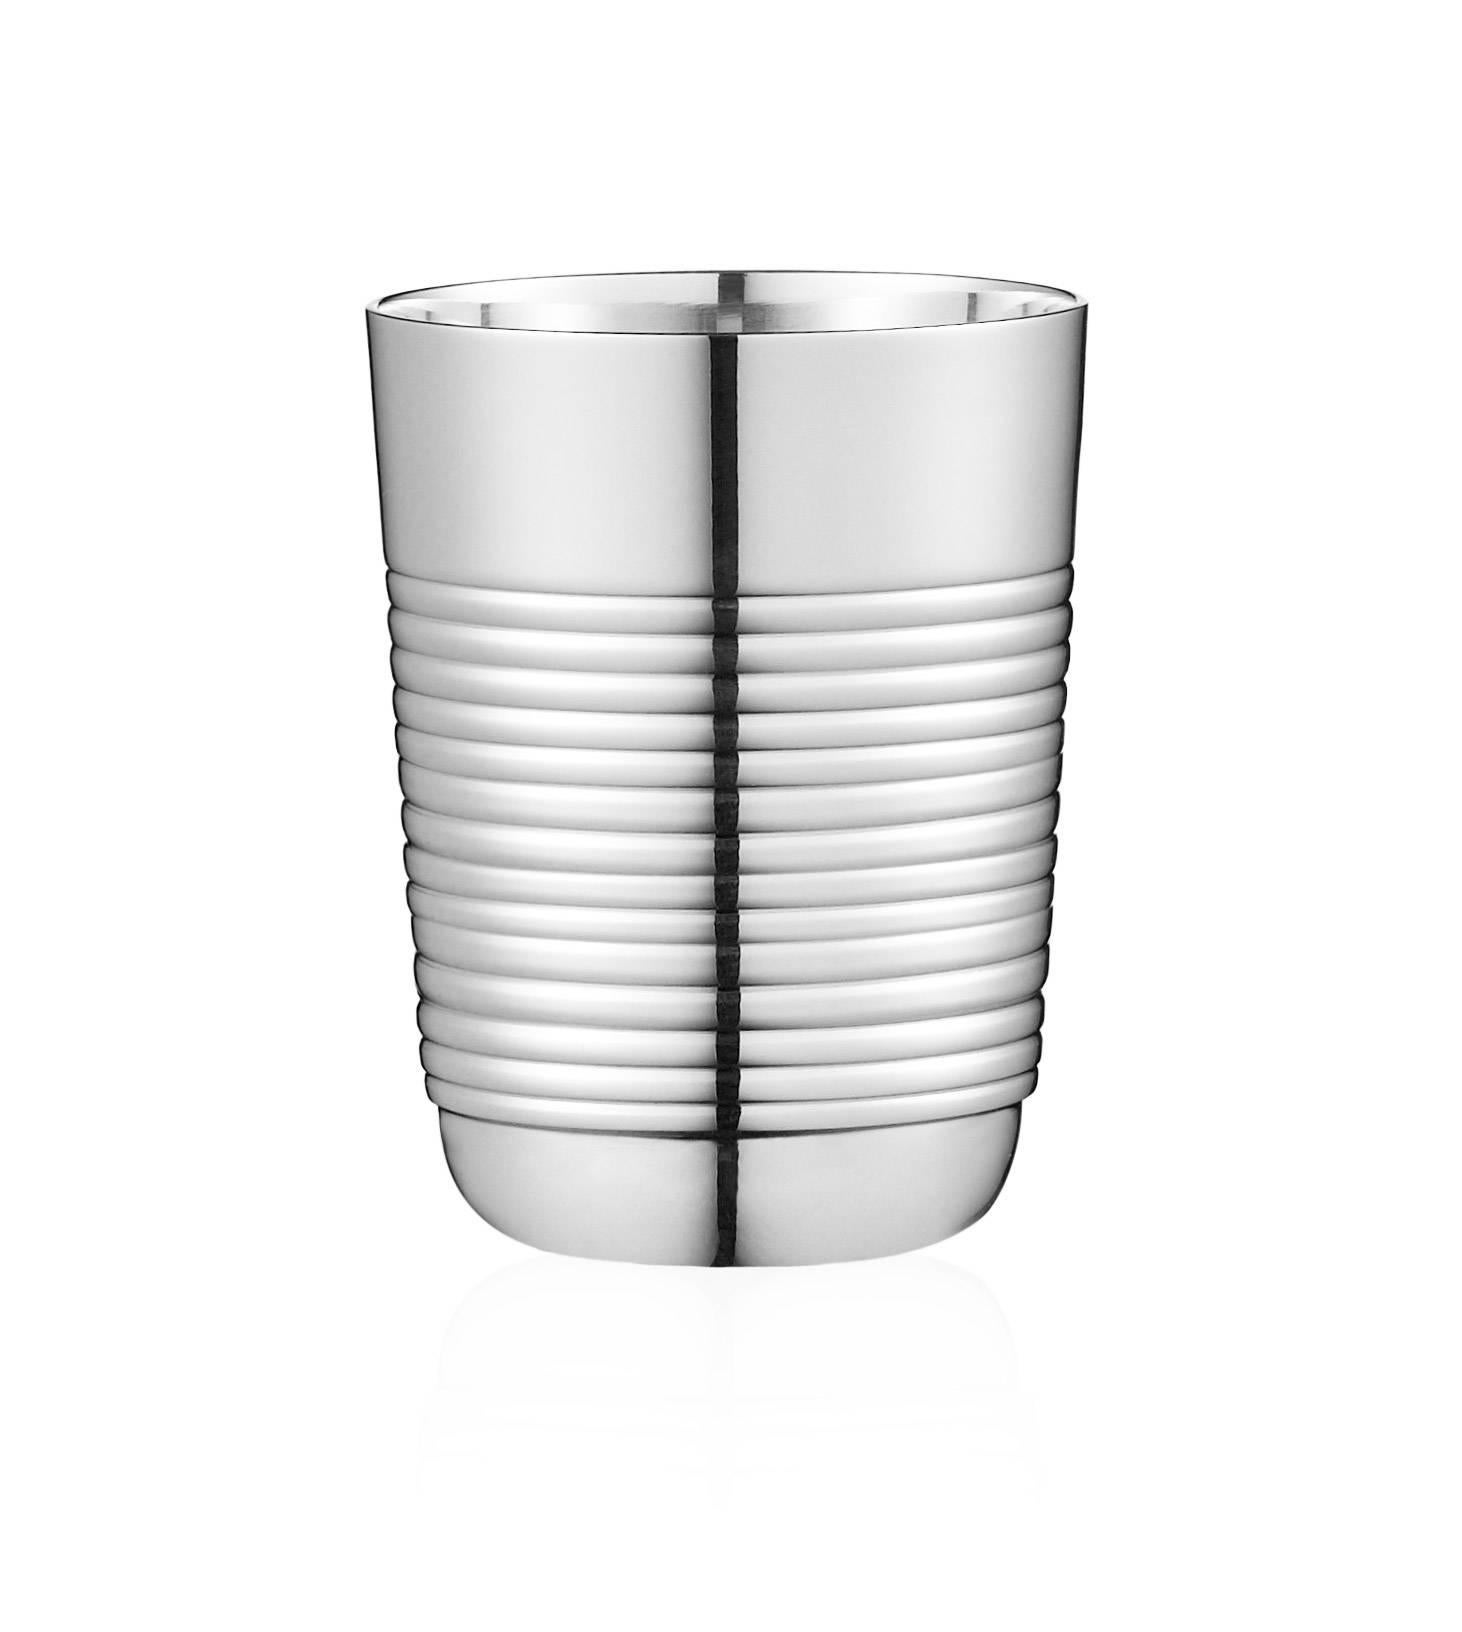 Designer.
Jean Puiforcat, 1935.
 
Description:
The understated elegance of Puiforcat's Filleted Shaker Set is emphasized by the painstaking silver work required to create this perfectly sleek and oblong sterling silver shape. The shaker is